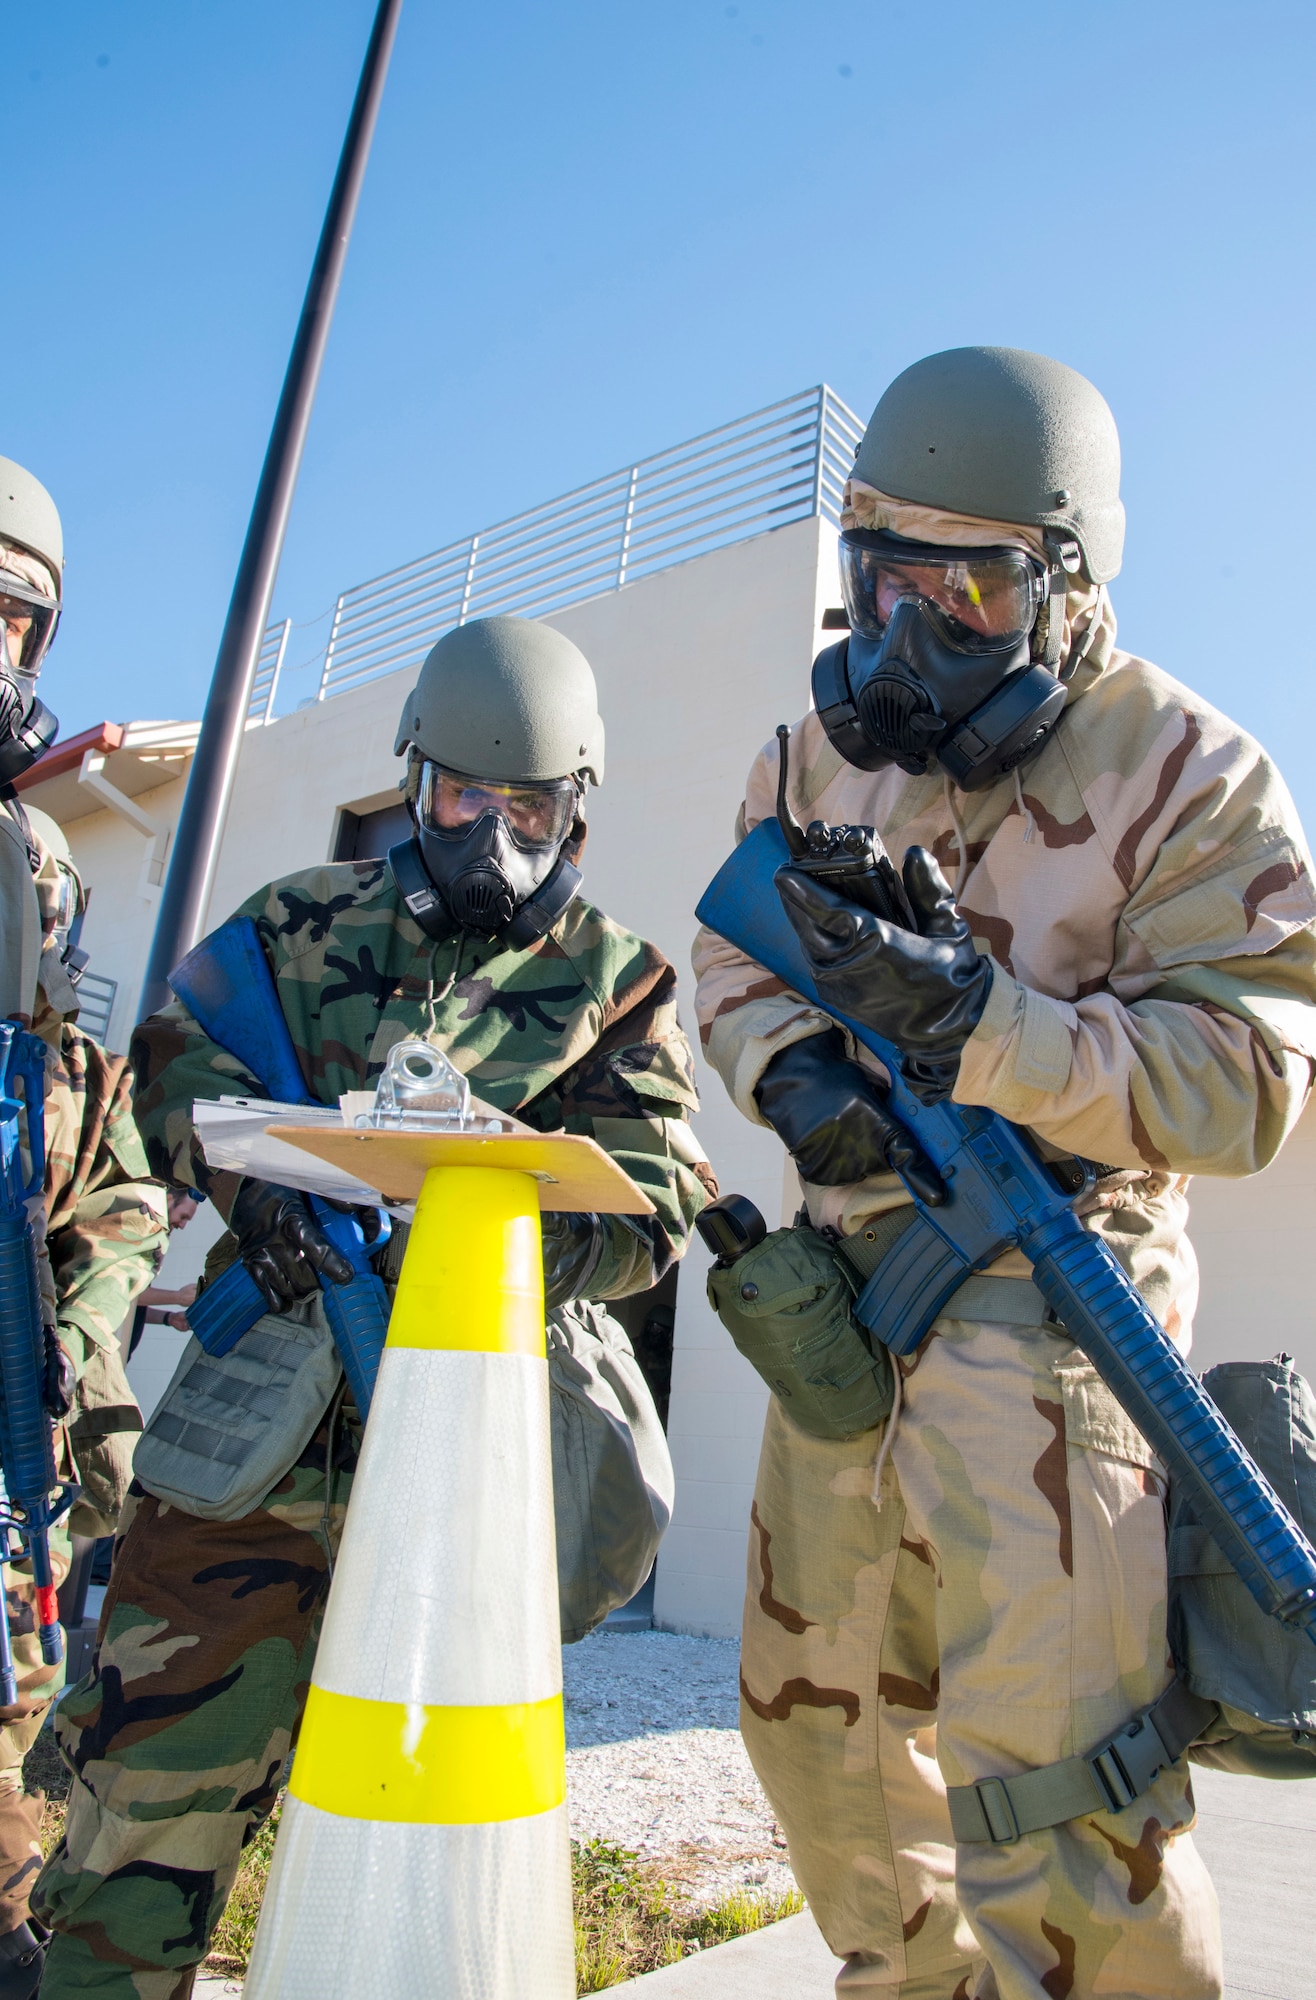 6th Mission Support Group Airmen search for signs of chemical weapons after a simulated air attack
during an Ability to Survive and Operate training exercise at MacDill Air Force Base, Fla., Dec. 6, 2018. By
checking for signs of chemical weapons, these Airmen are able to identify and mitigate hazards that
could hinder operations and security.